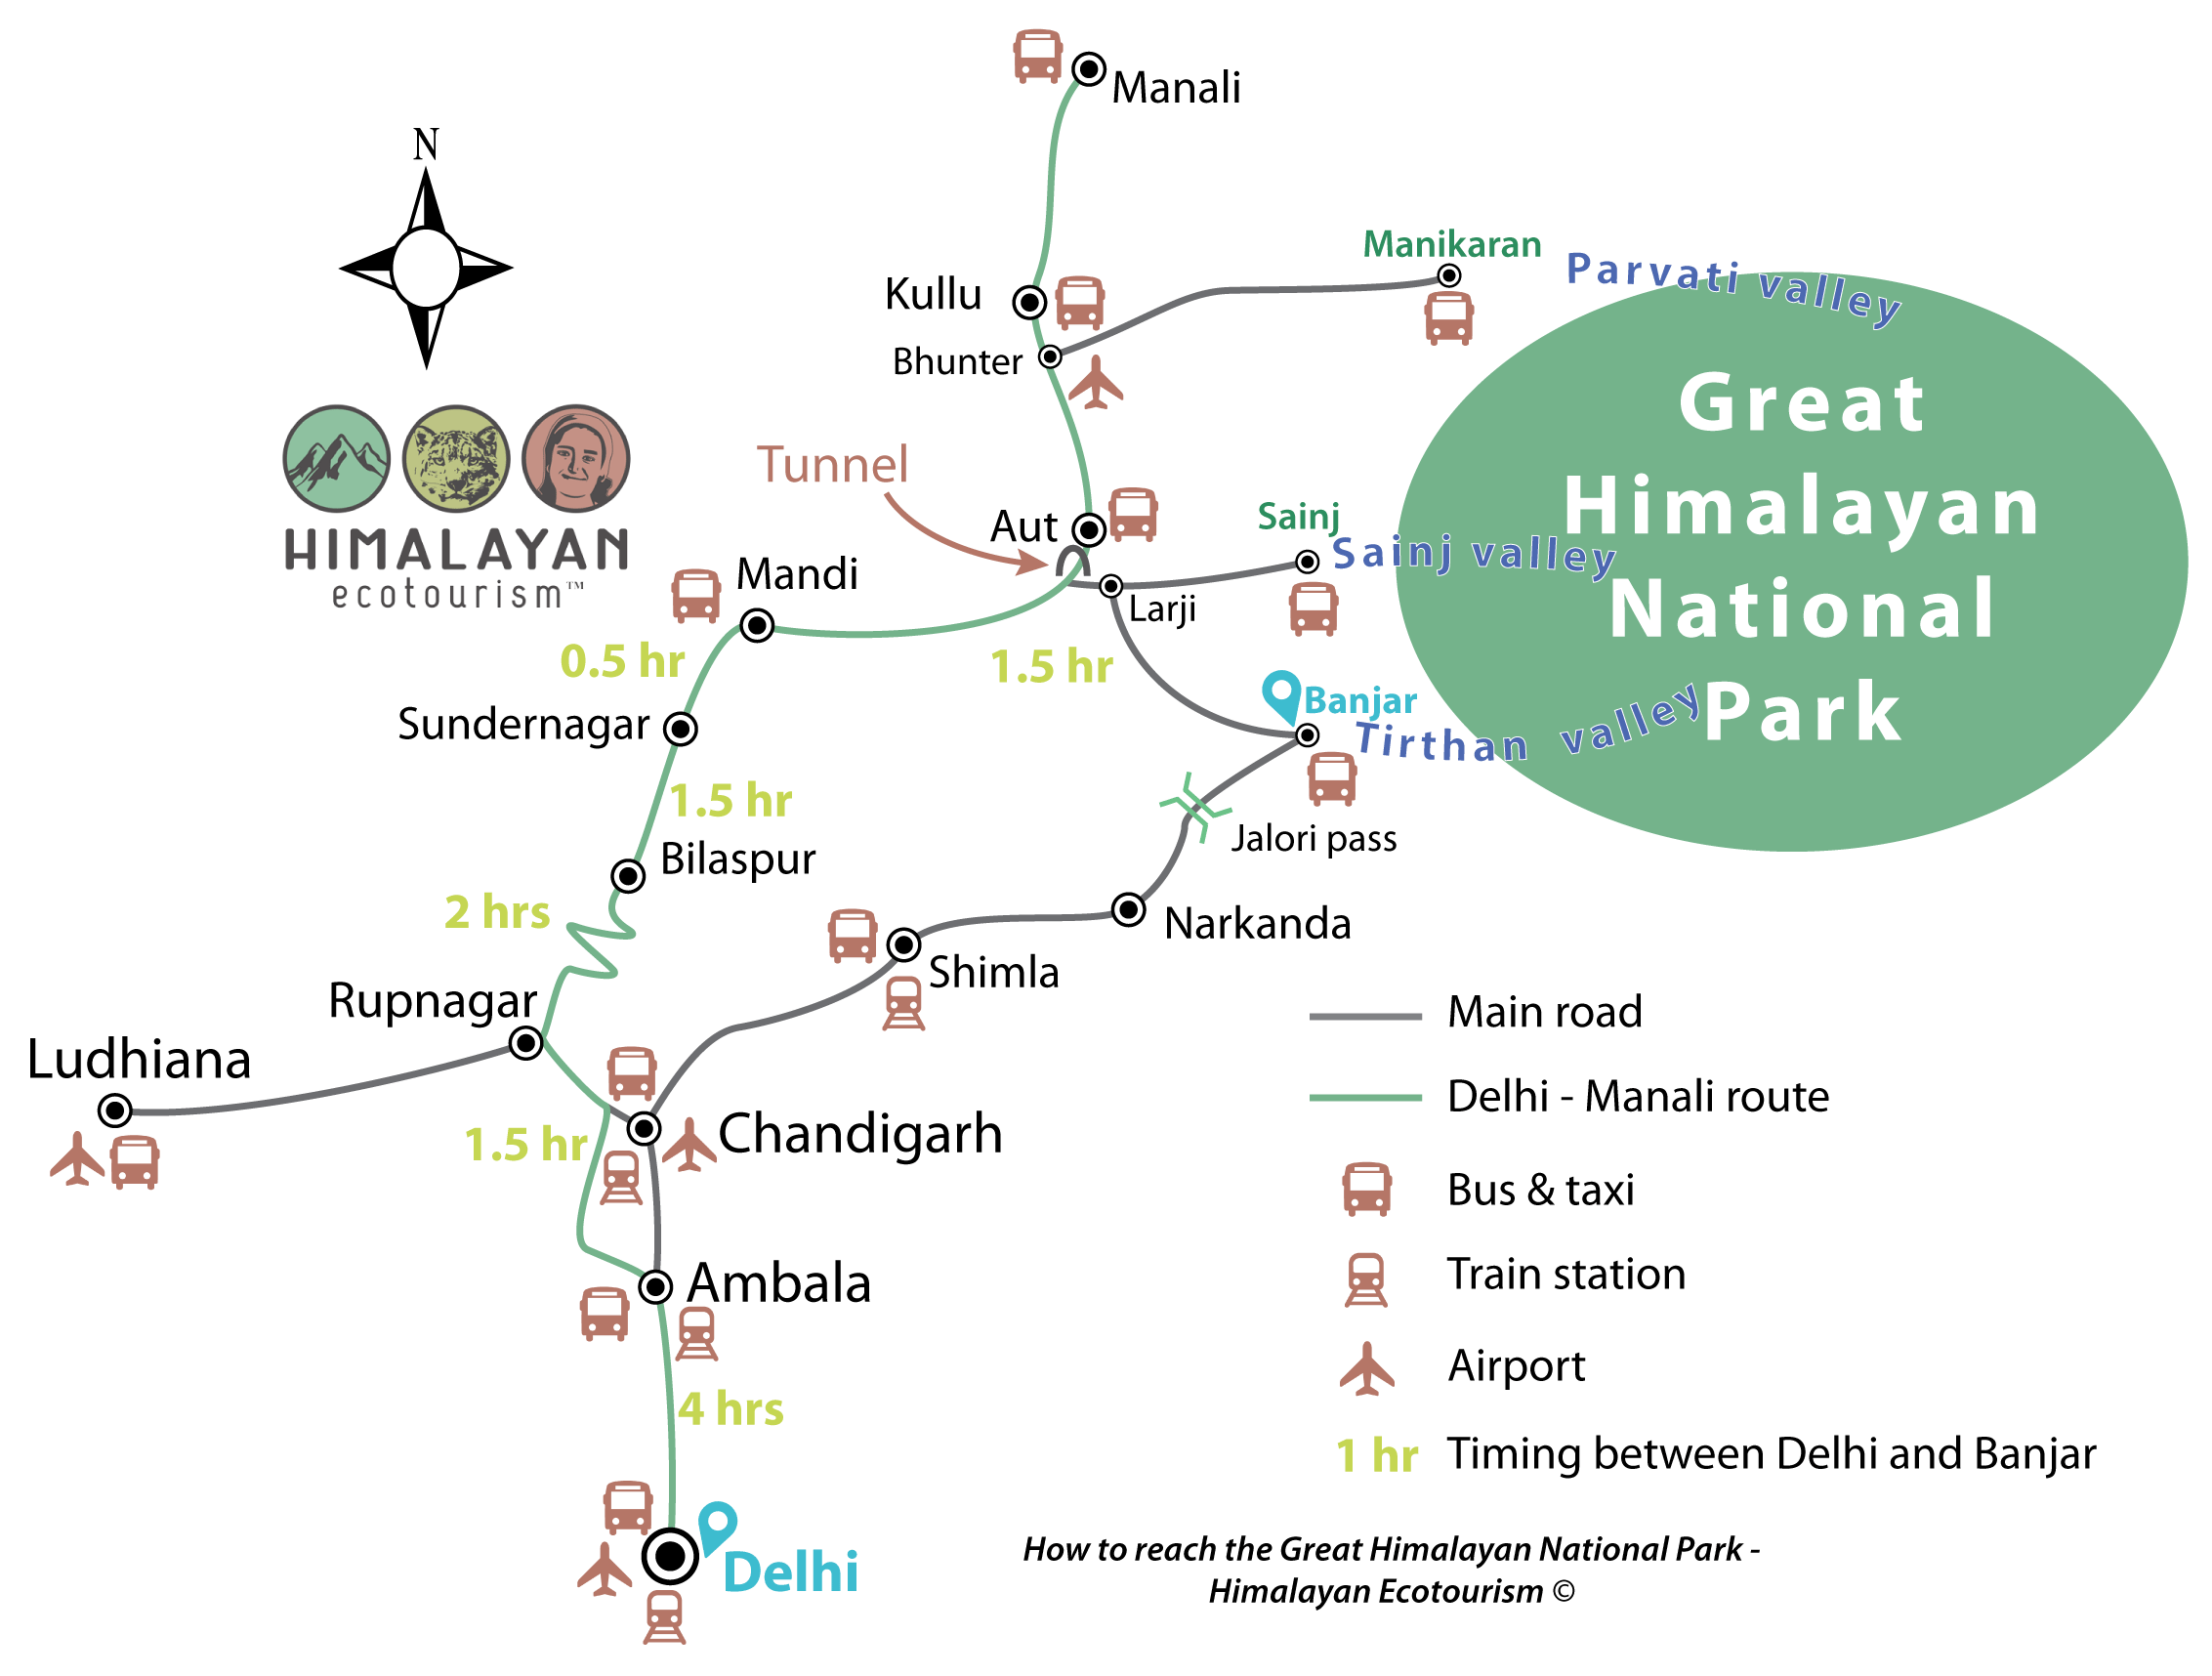 Getting to Great Himalayan National Park